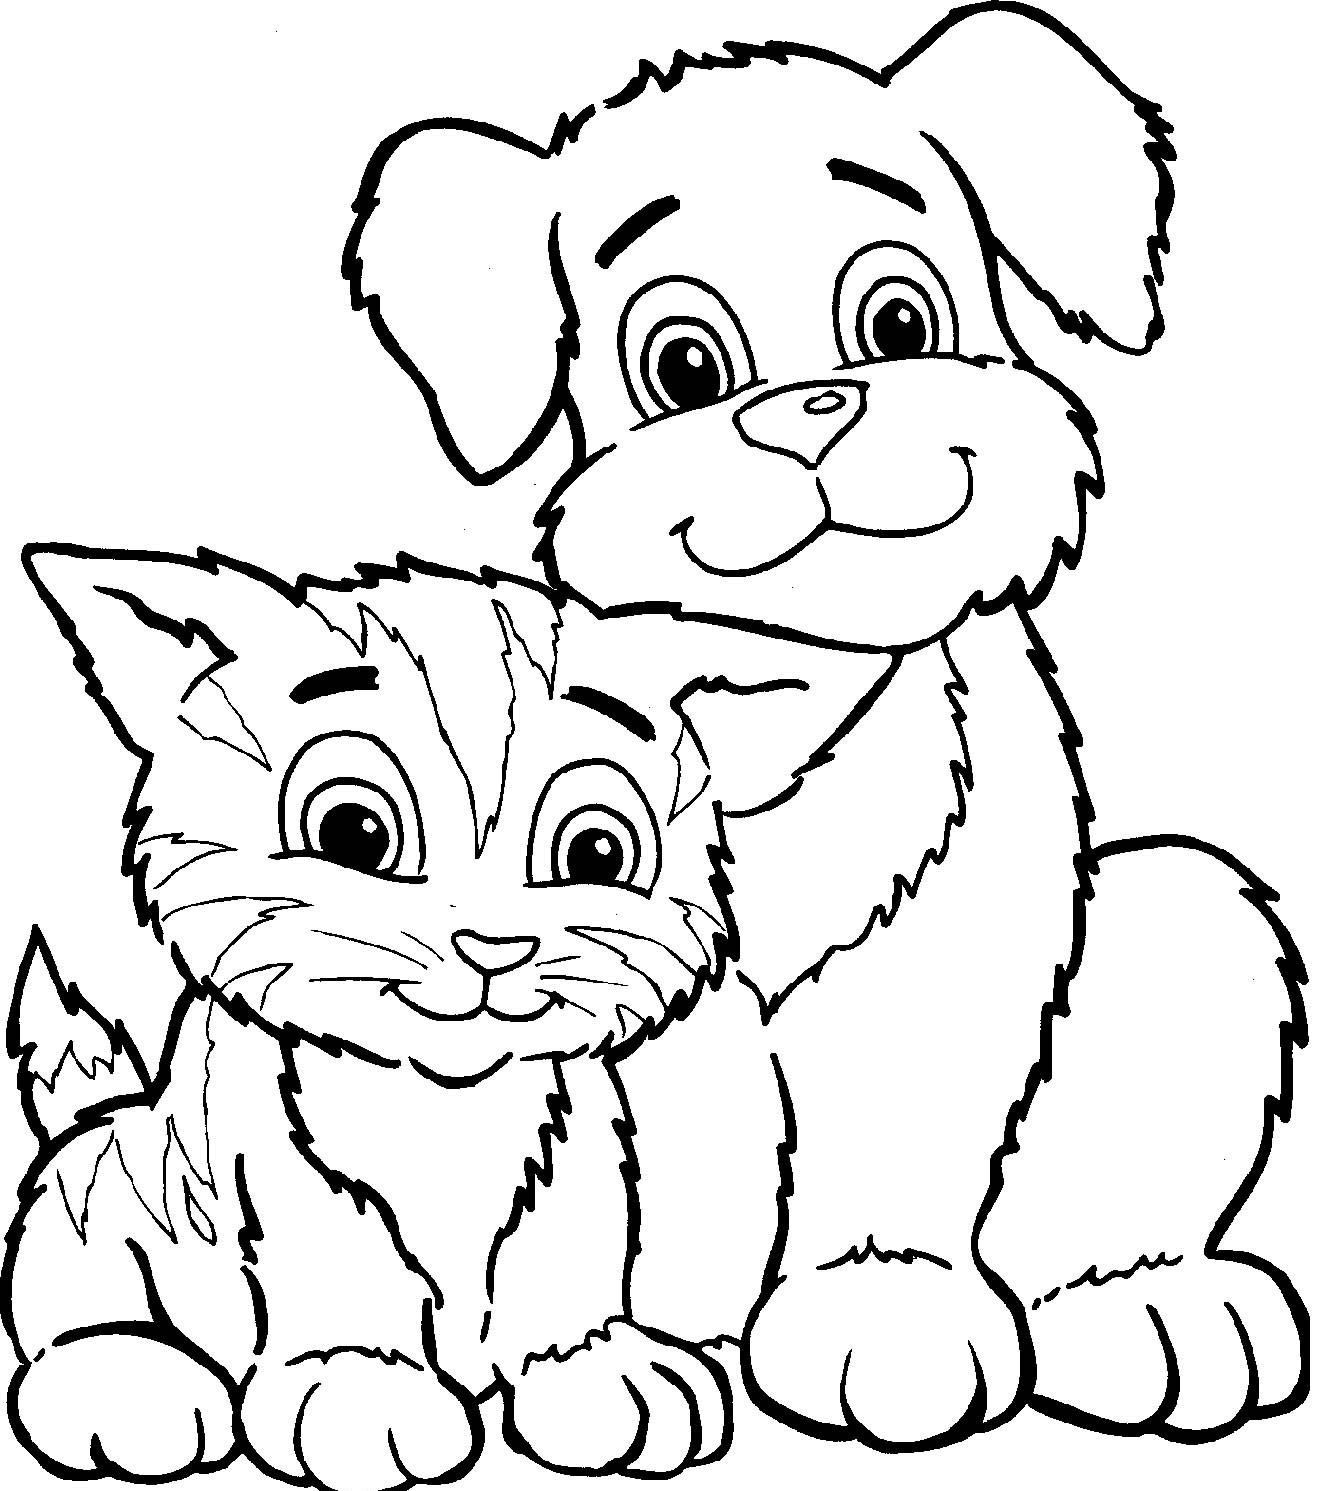 Cat Coloring Pages to Print